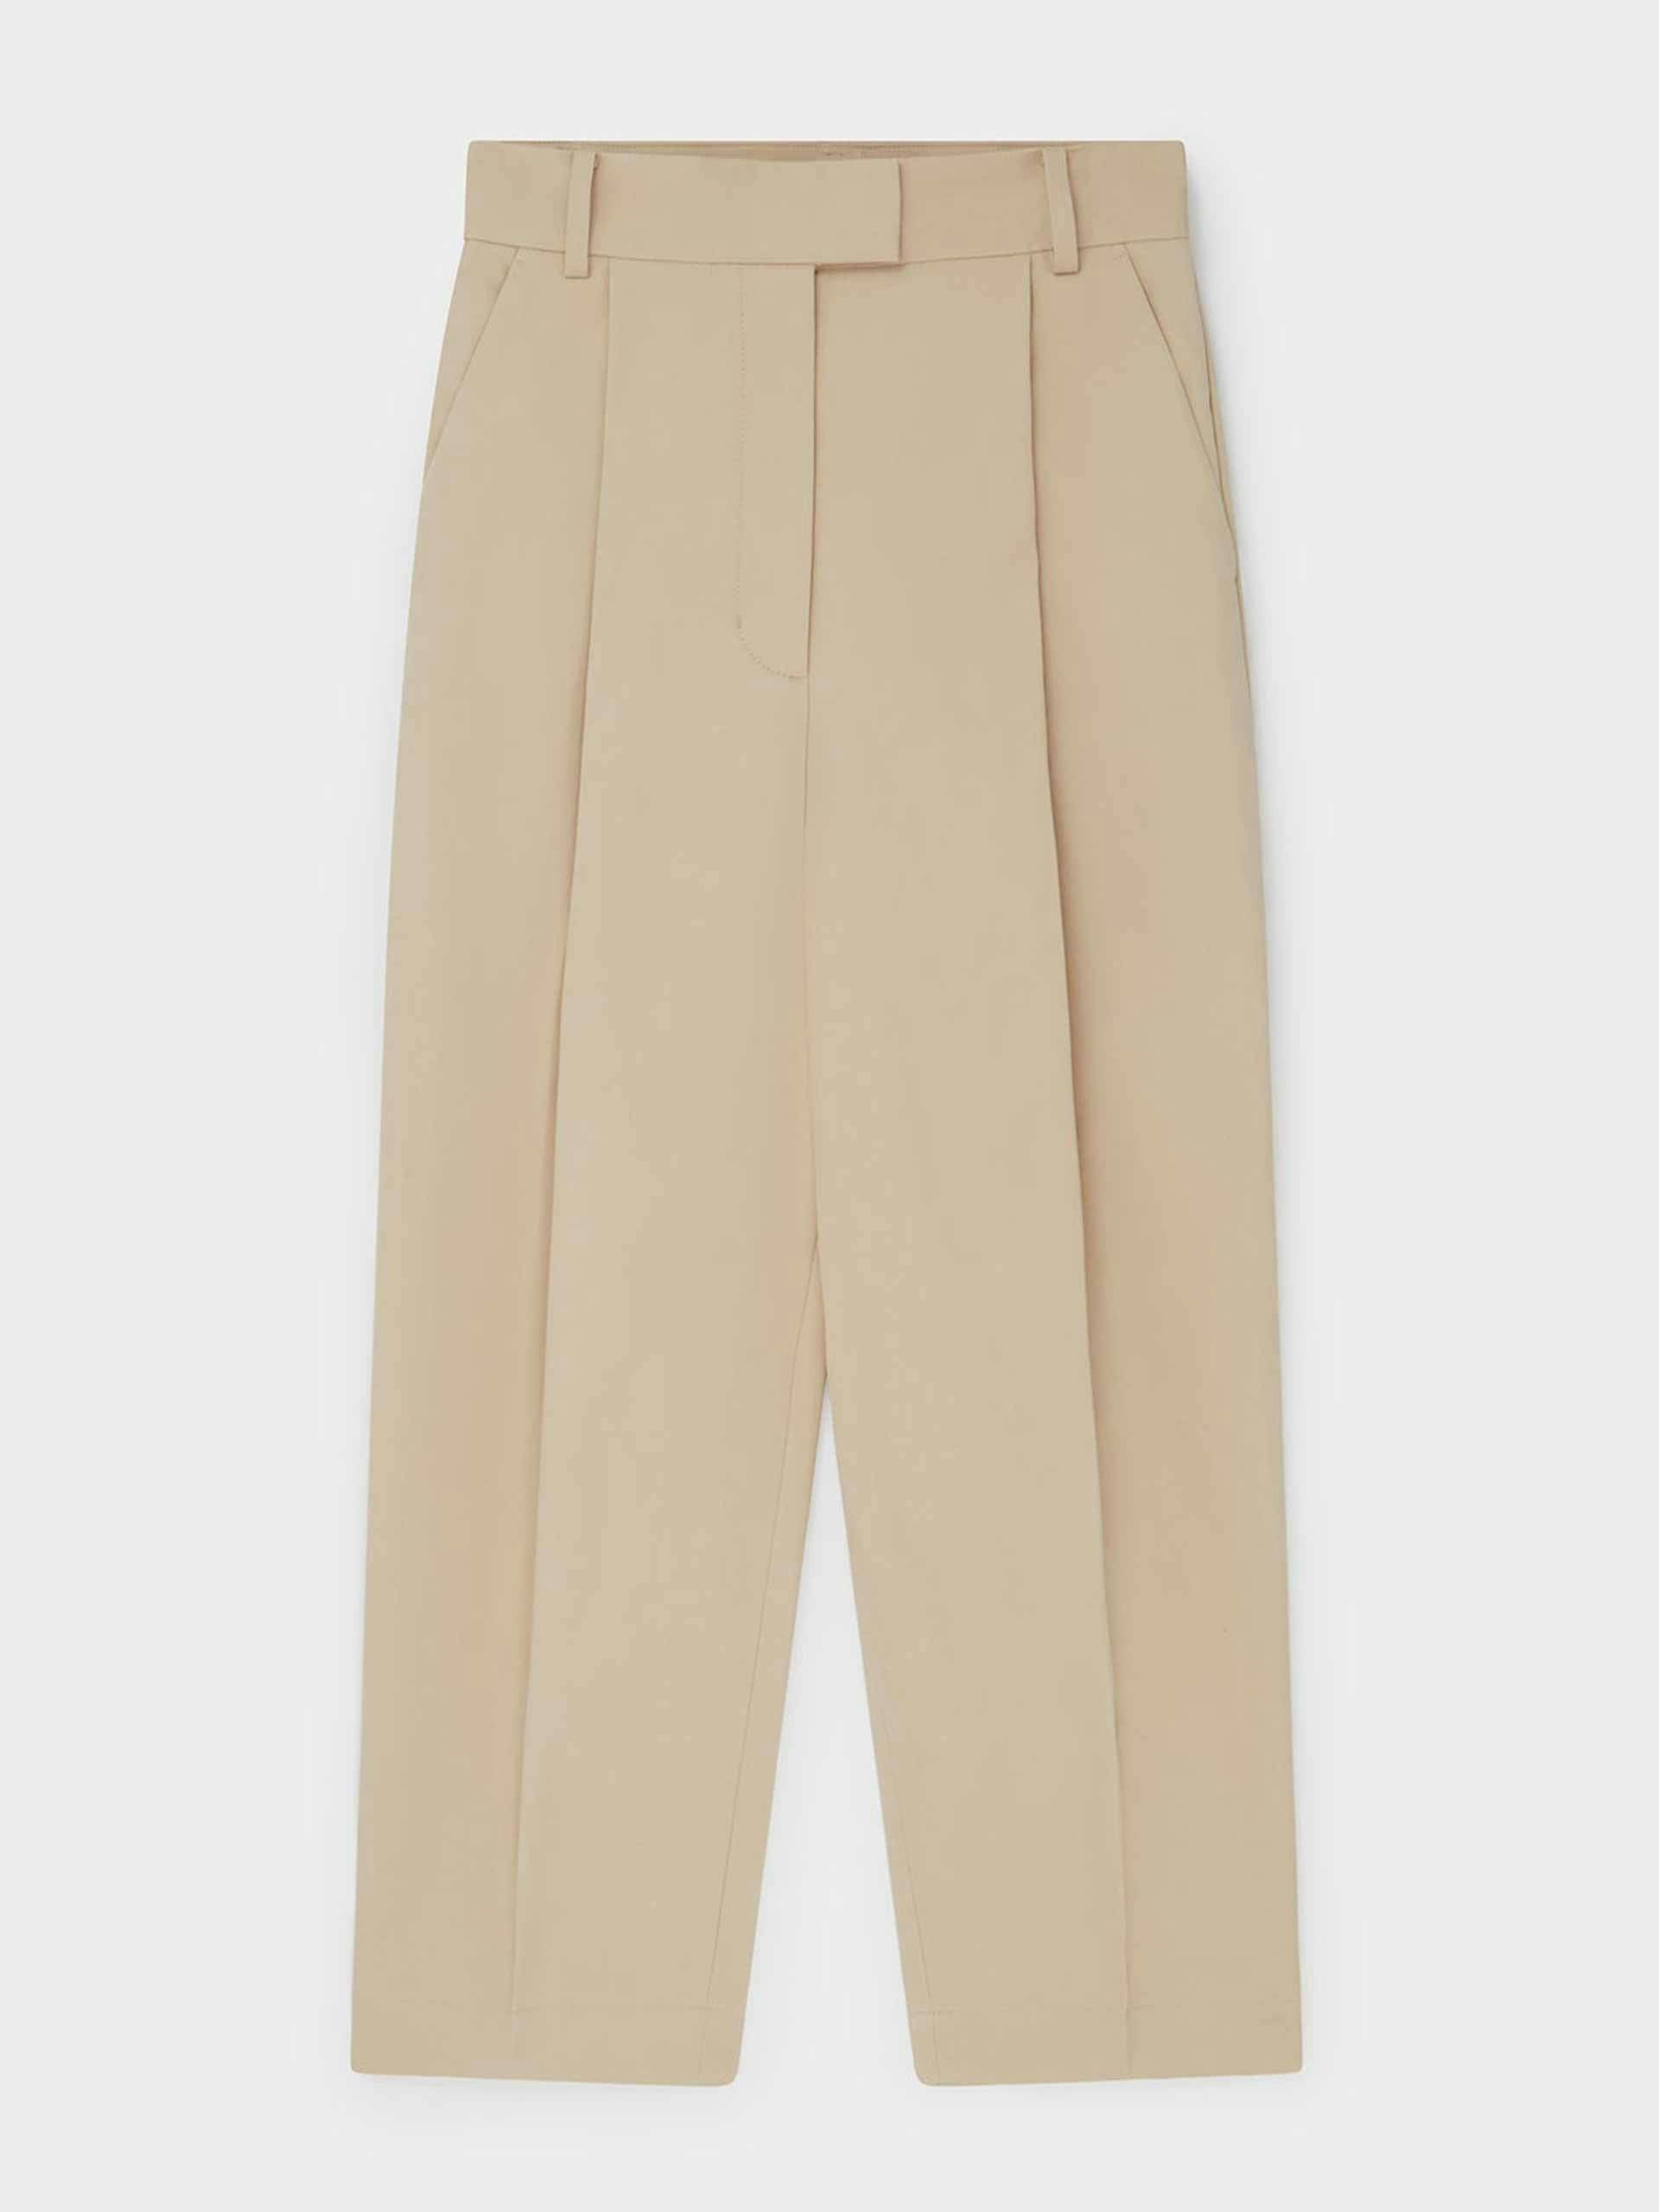 Pleated beige trousers